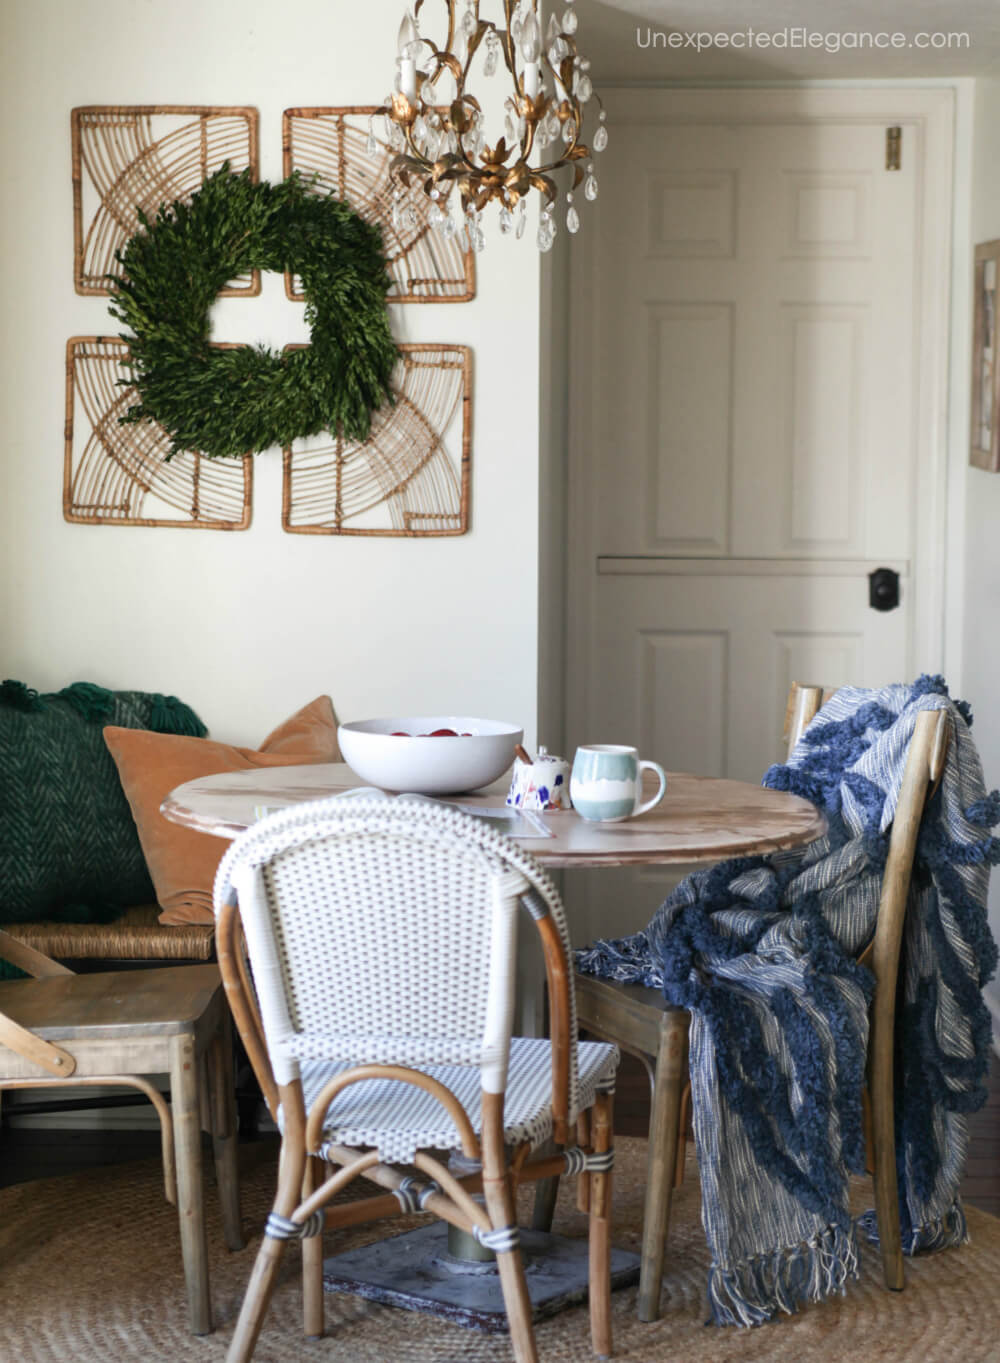 Simple wreaths add instant holiday flare.